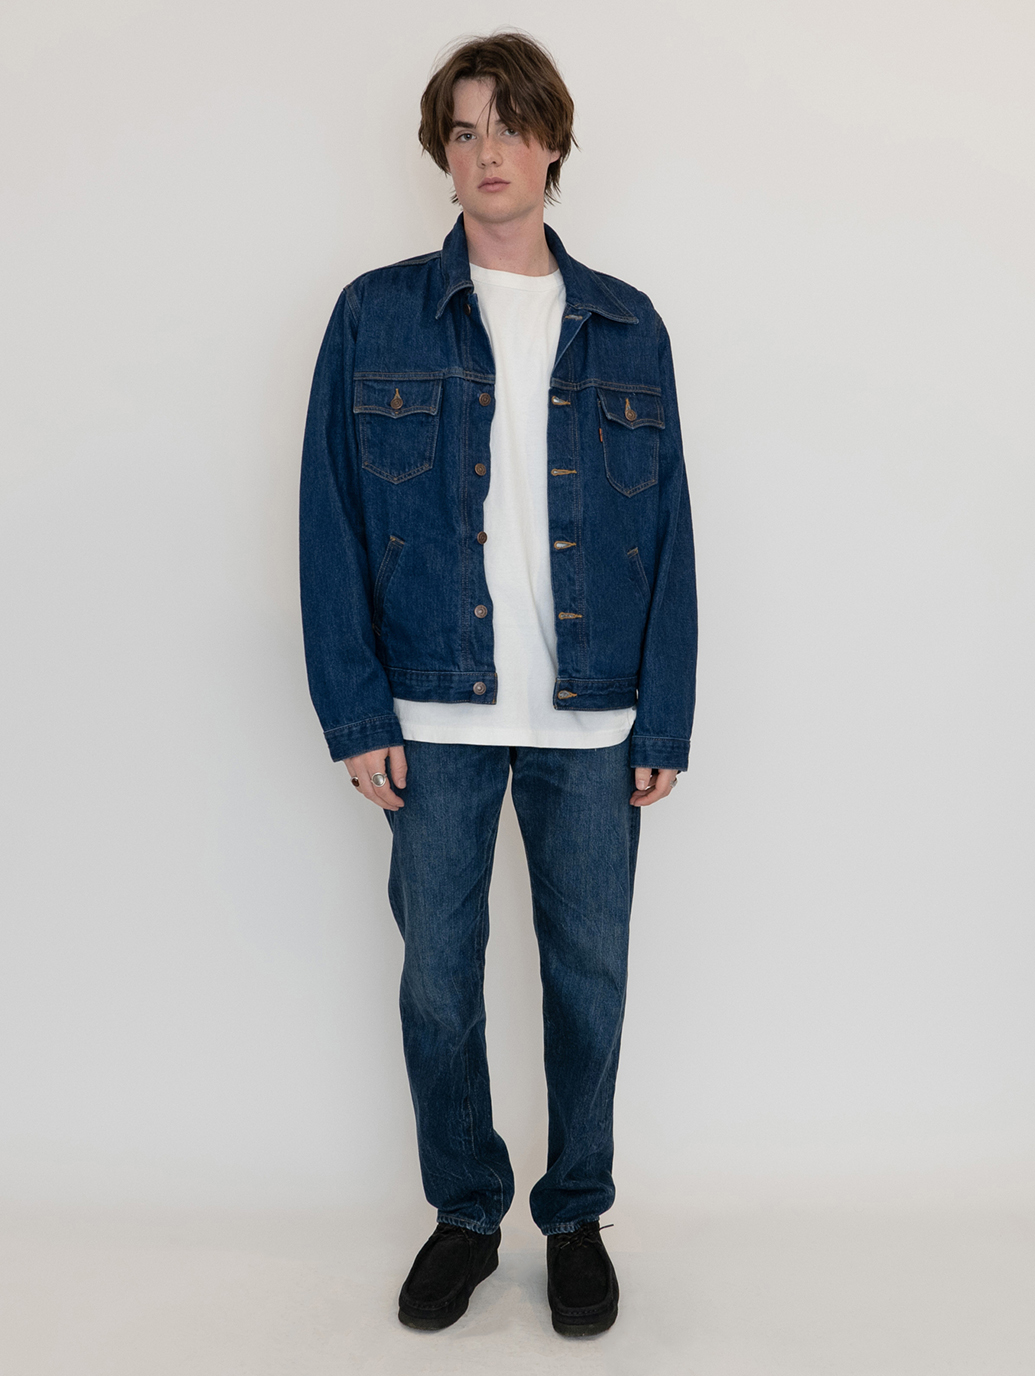 LEVI'S® VINTAGE CLOTHING1954モデル 501® JEANS Camp New Beginning